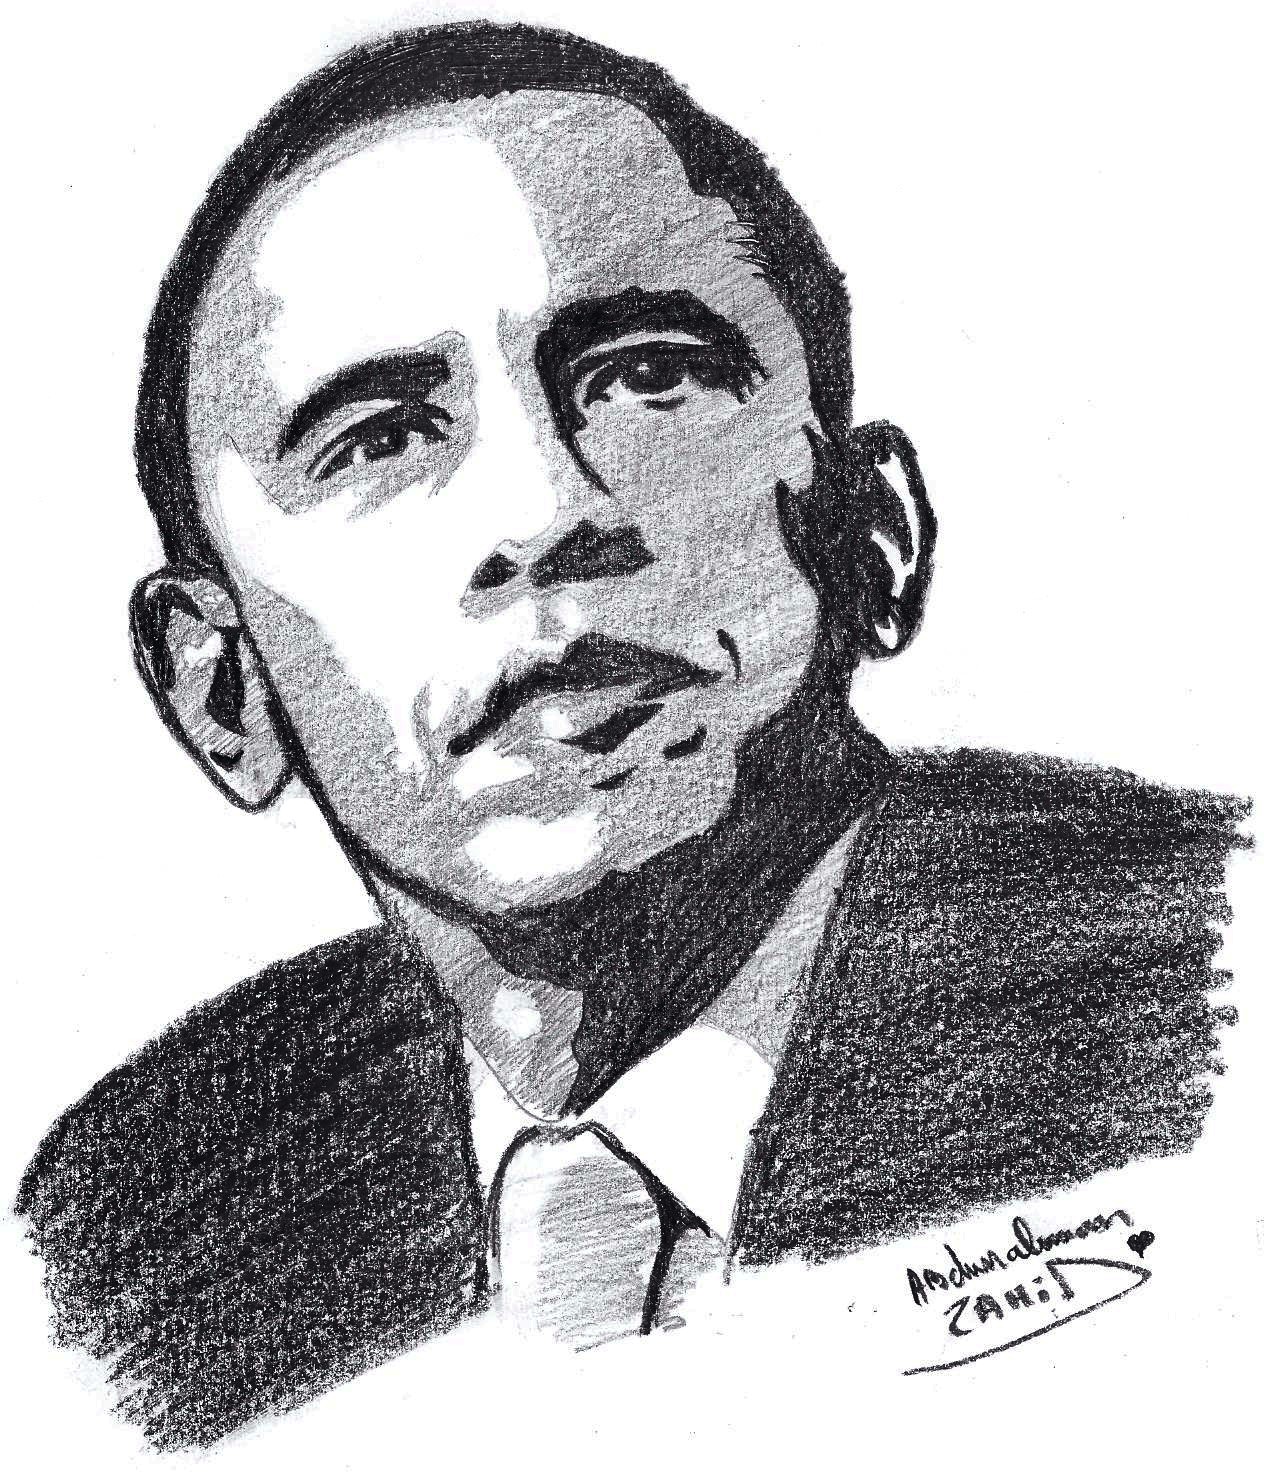 Cute Obama Sketch Line Draw with simple drawing